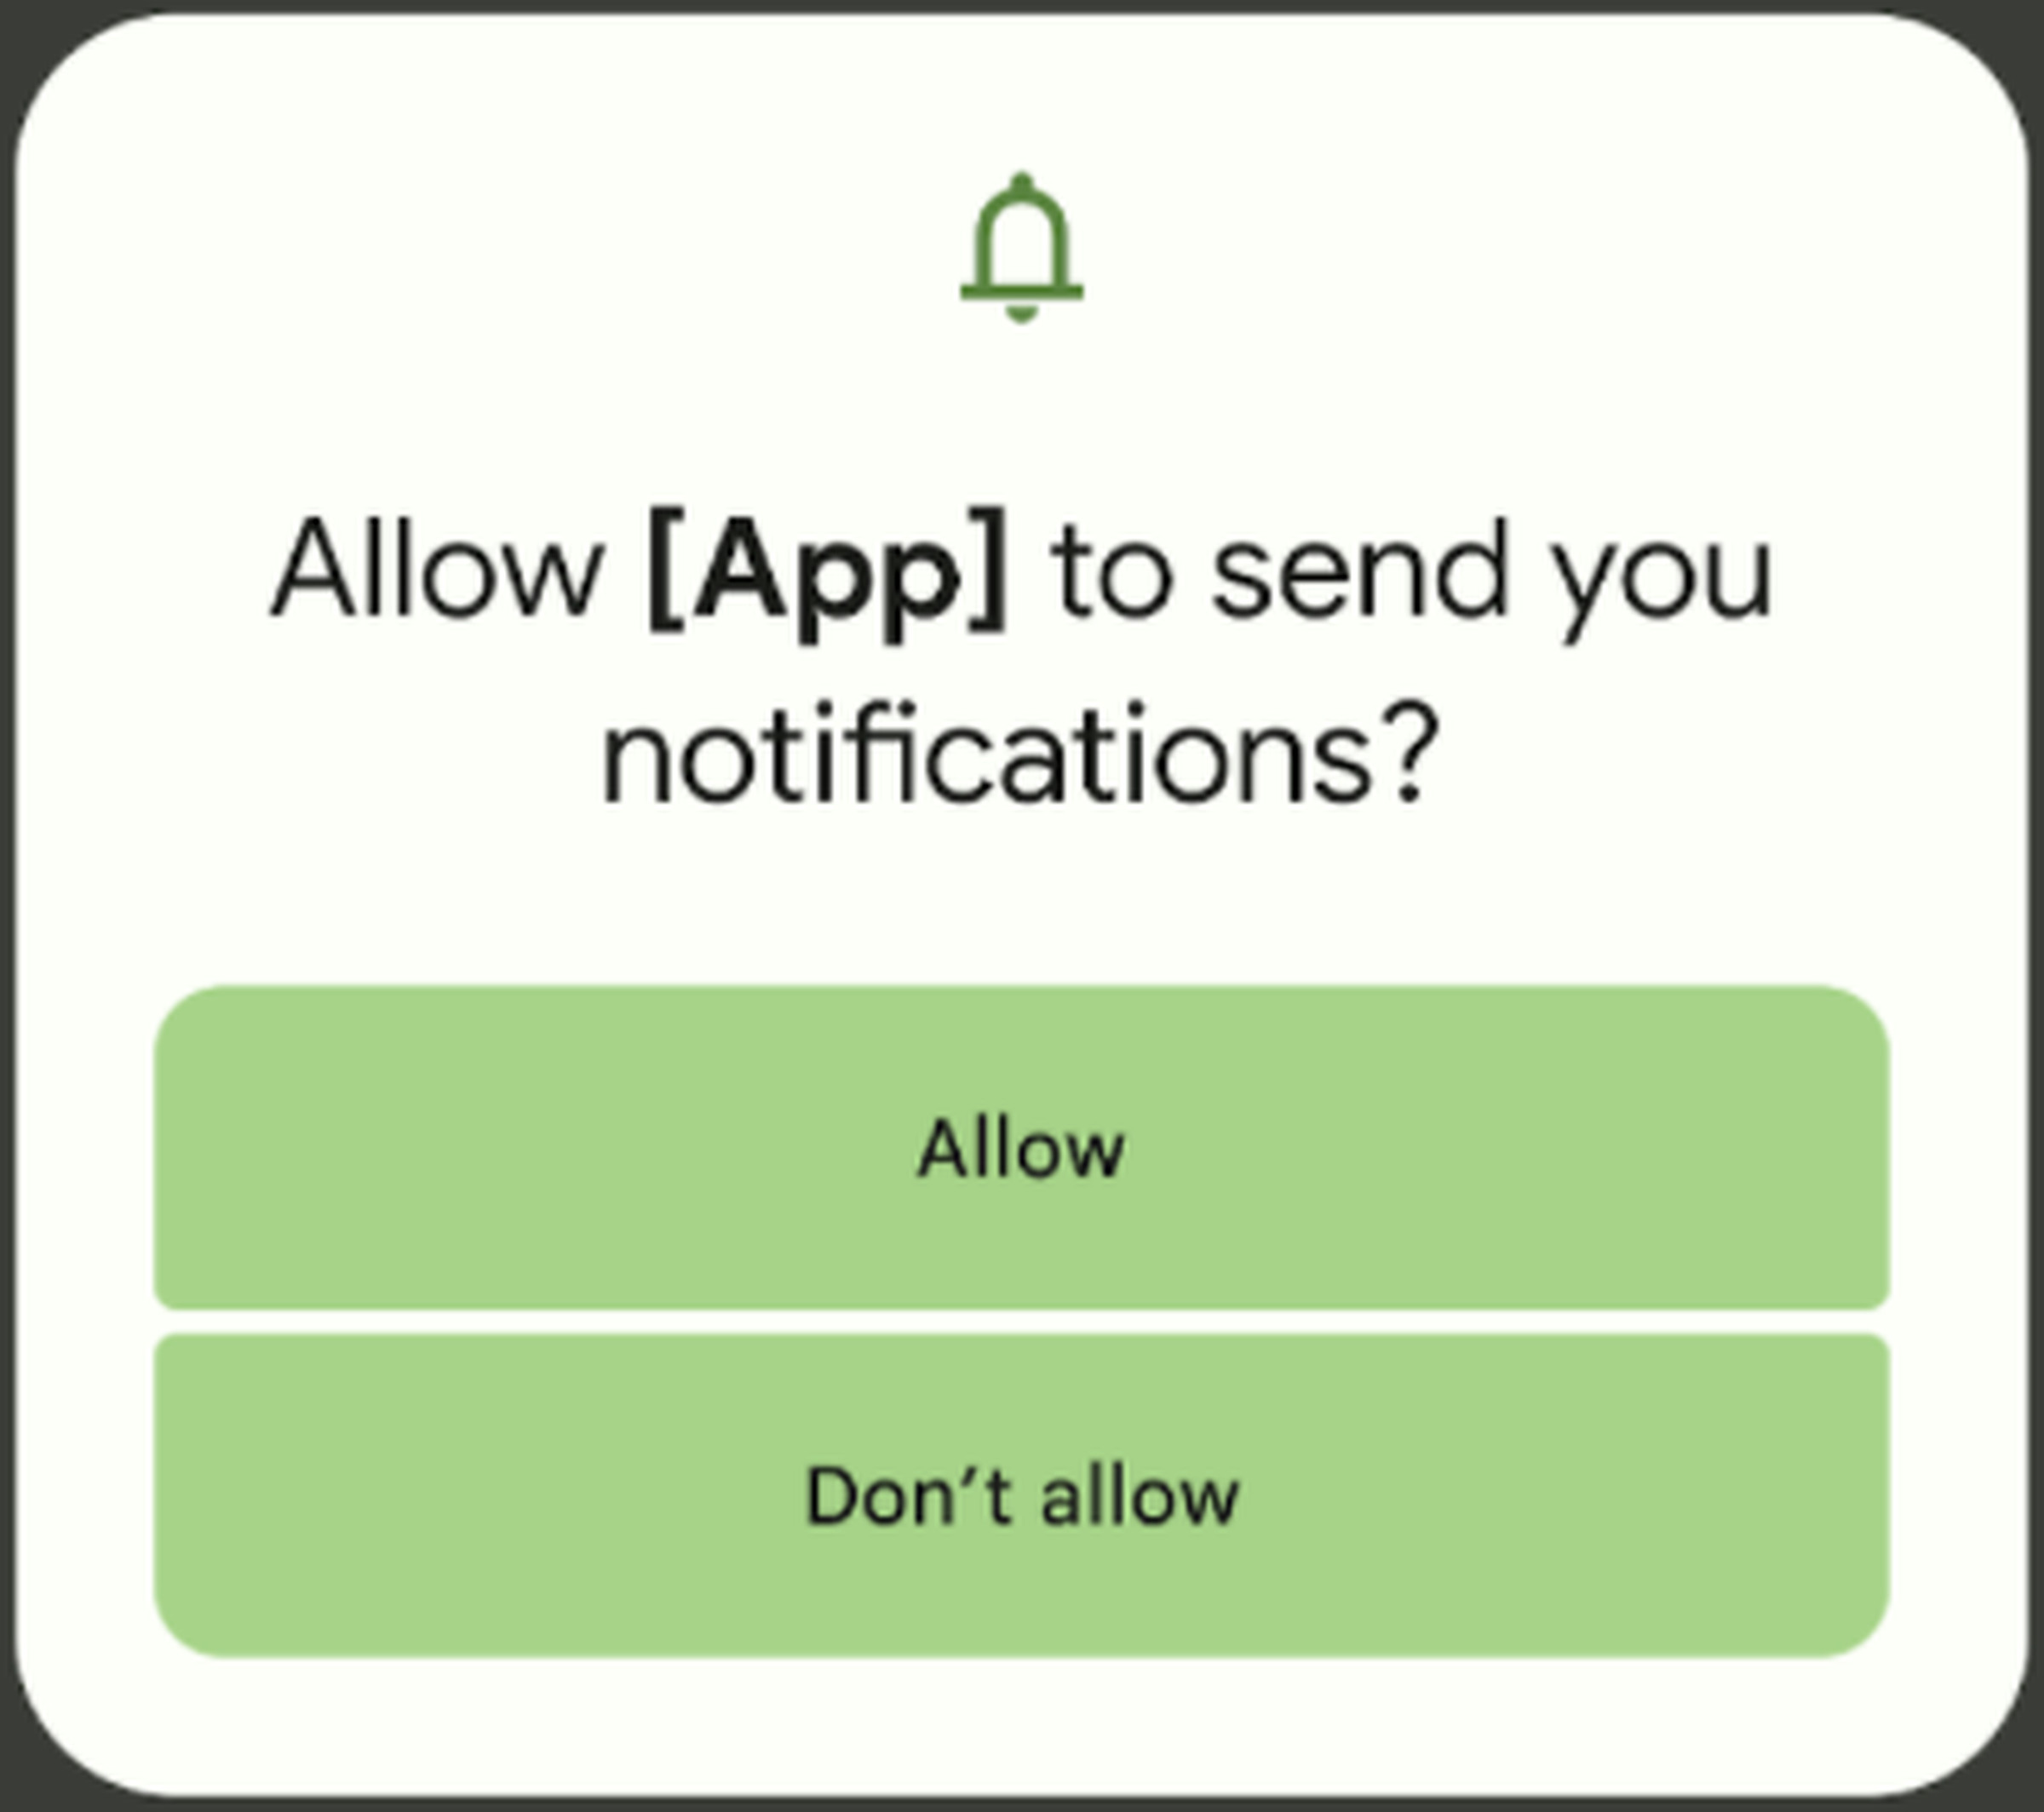 Google’s example of what a notification request box will look like.